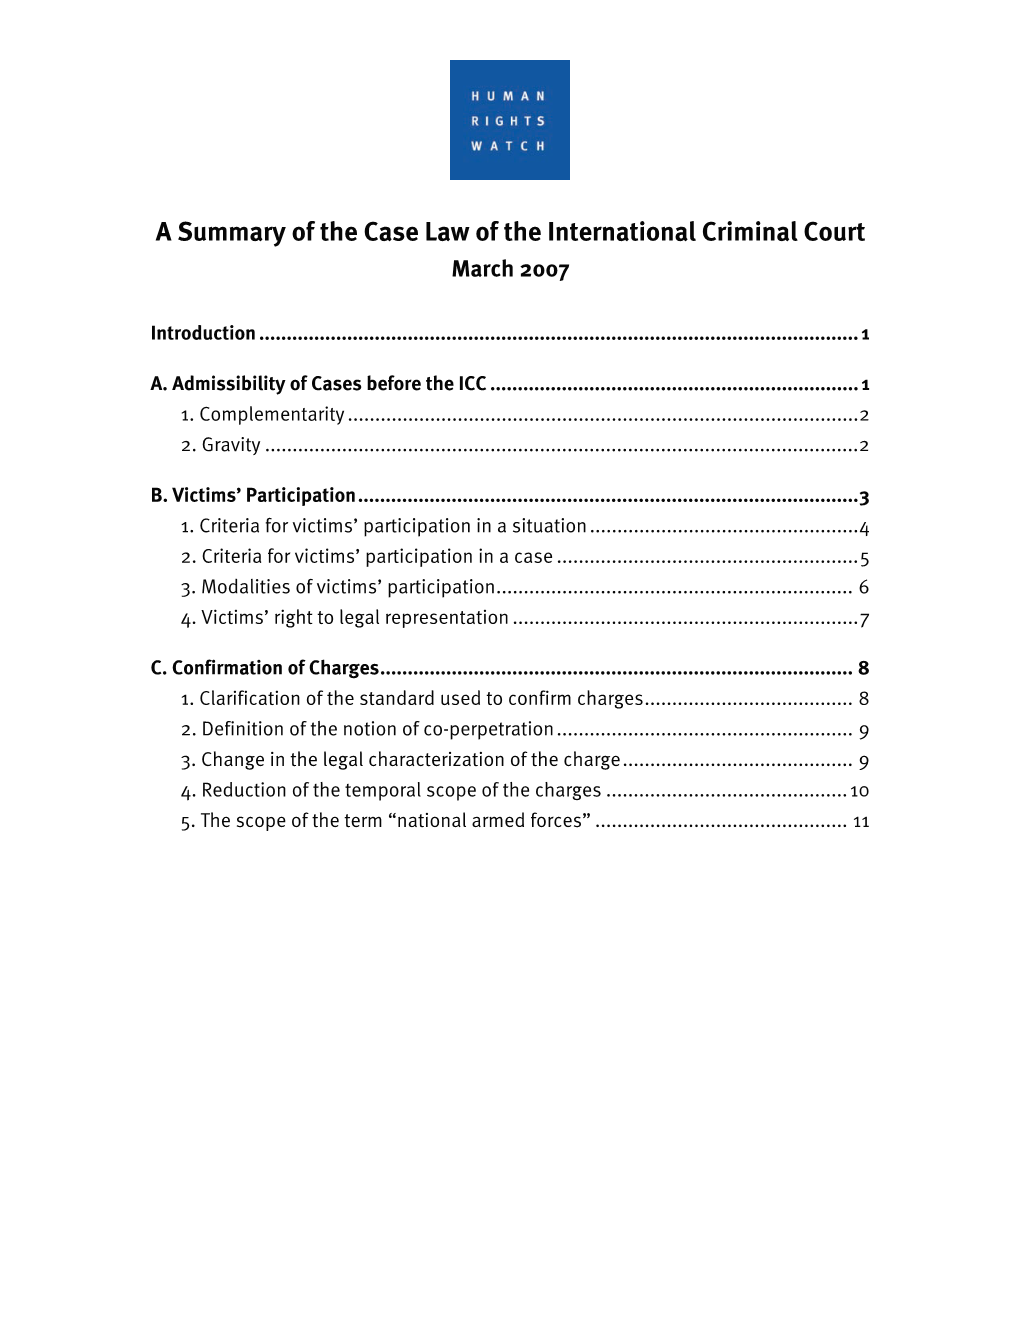 A Summary of the Case Law of the International Criminal Court March 2007